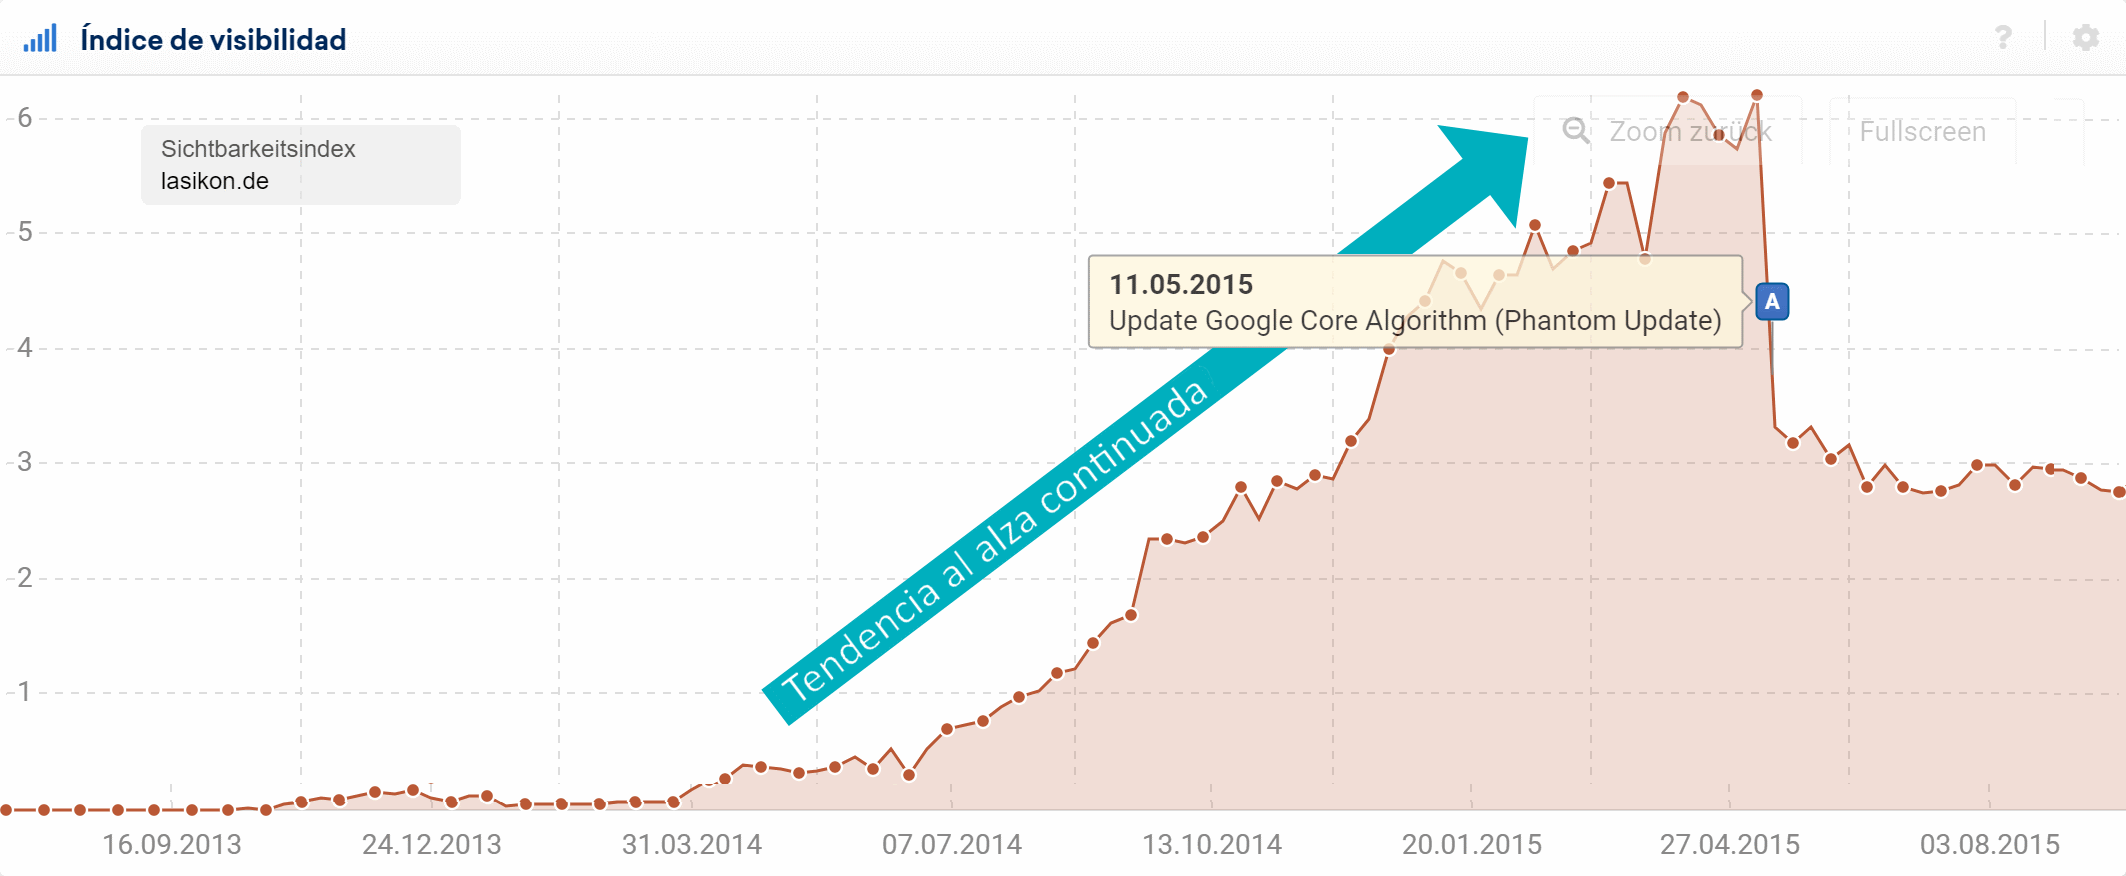 The domains upwards trend was stopped by Google's Core Algorithm Update